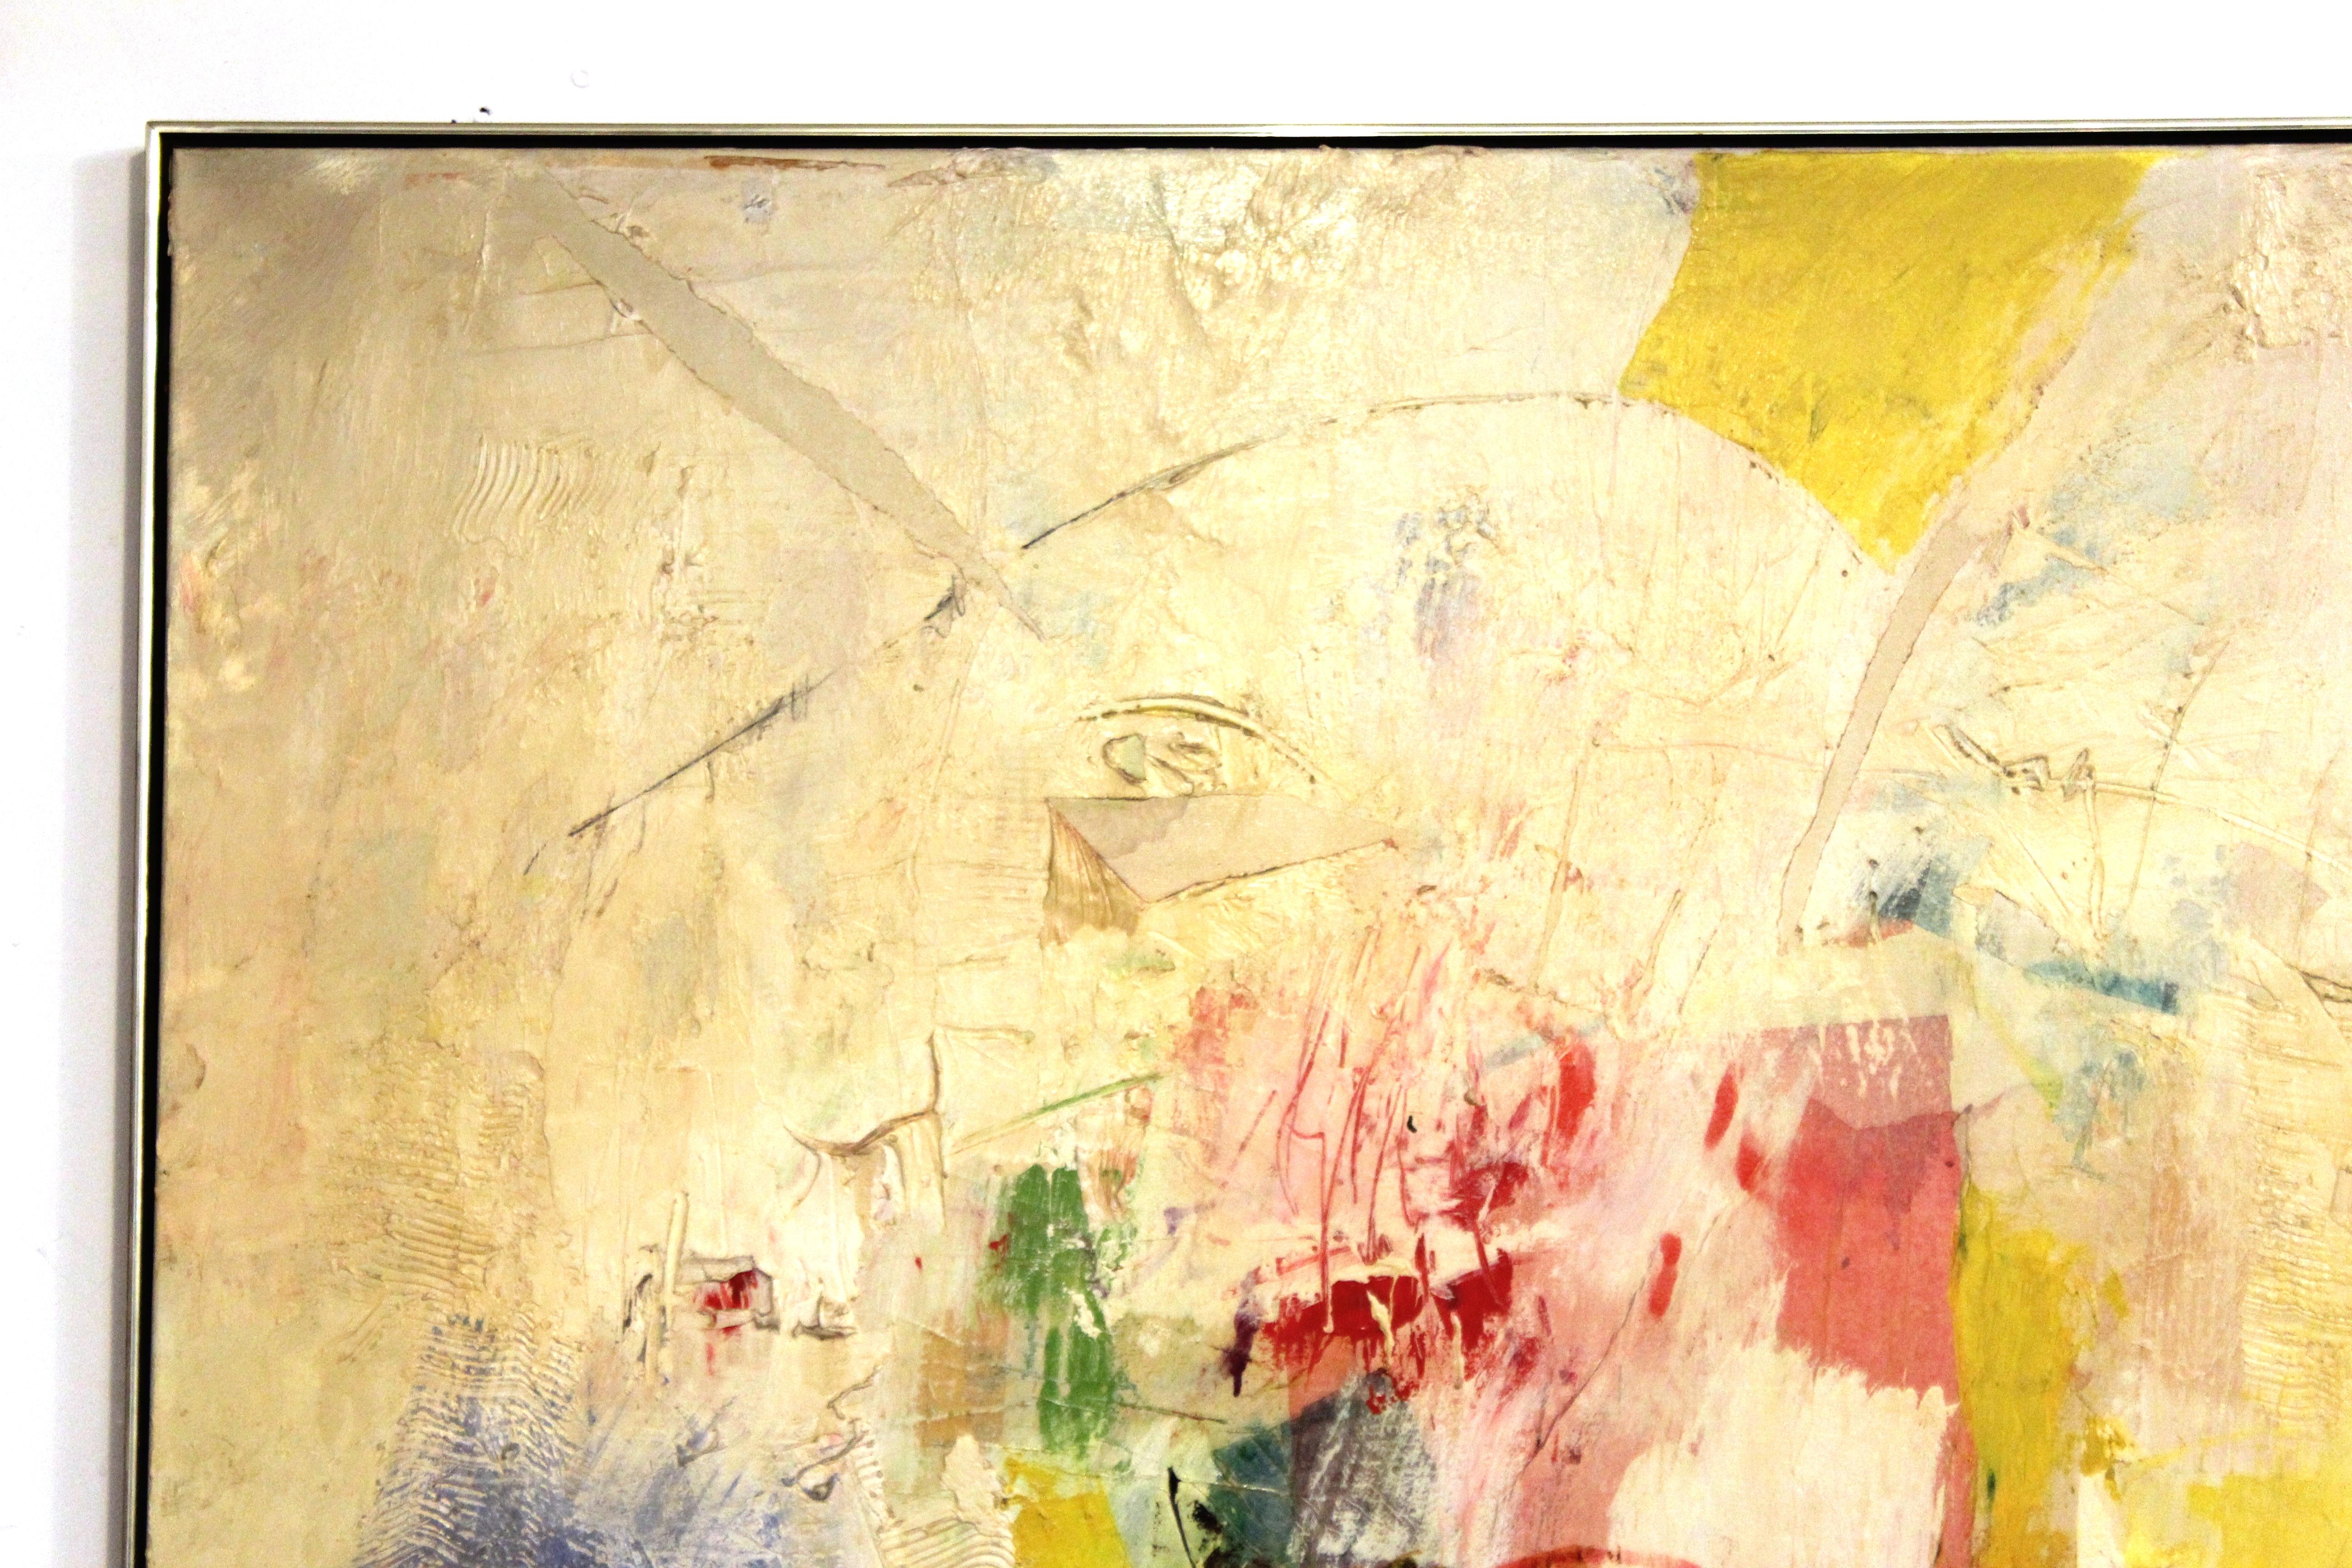 American abstract Expressionist painting of large proportion, with faded illegible signature in the lower right corner. The piece dates from the mid-20th century and is in great vintage condition with age-appropriate wear.